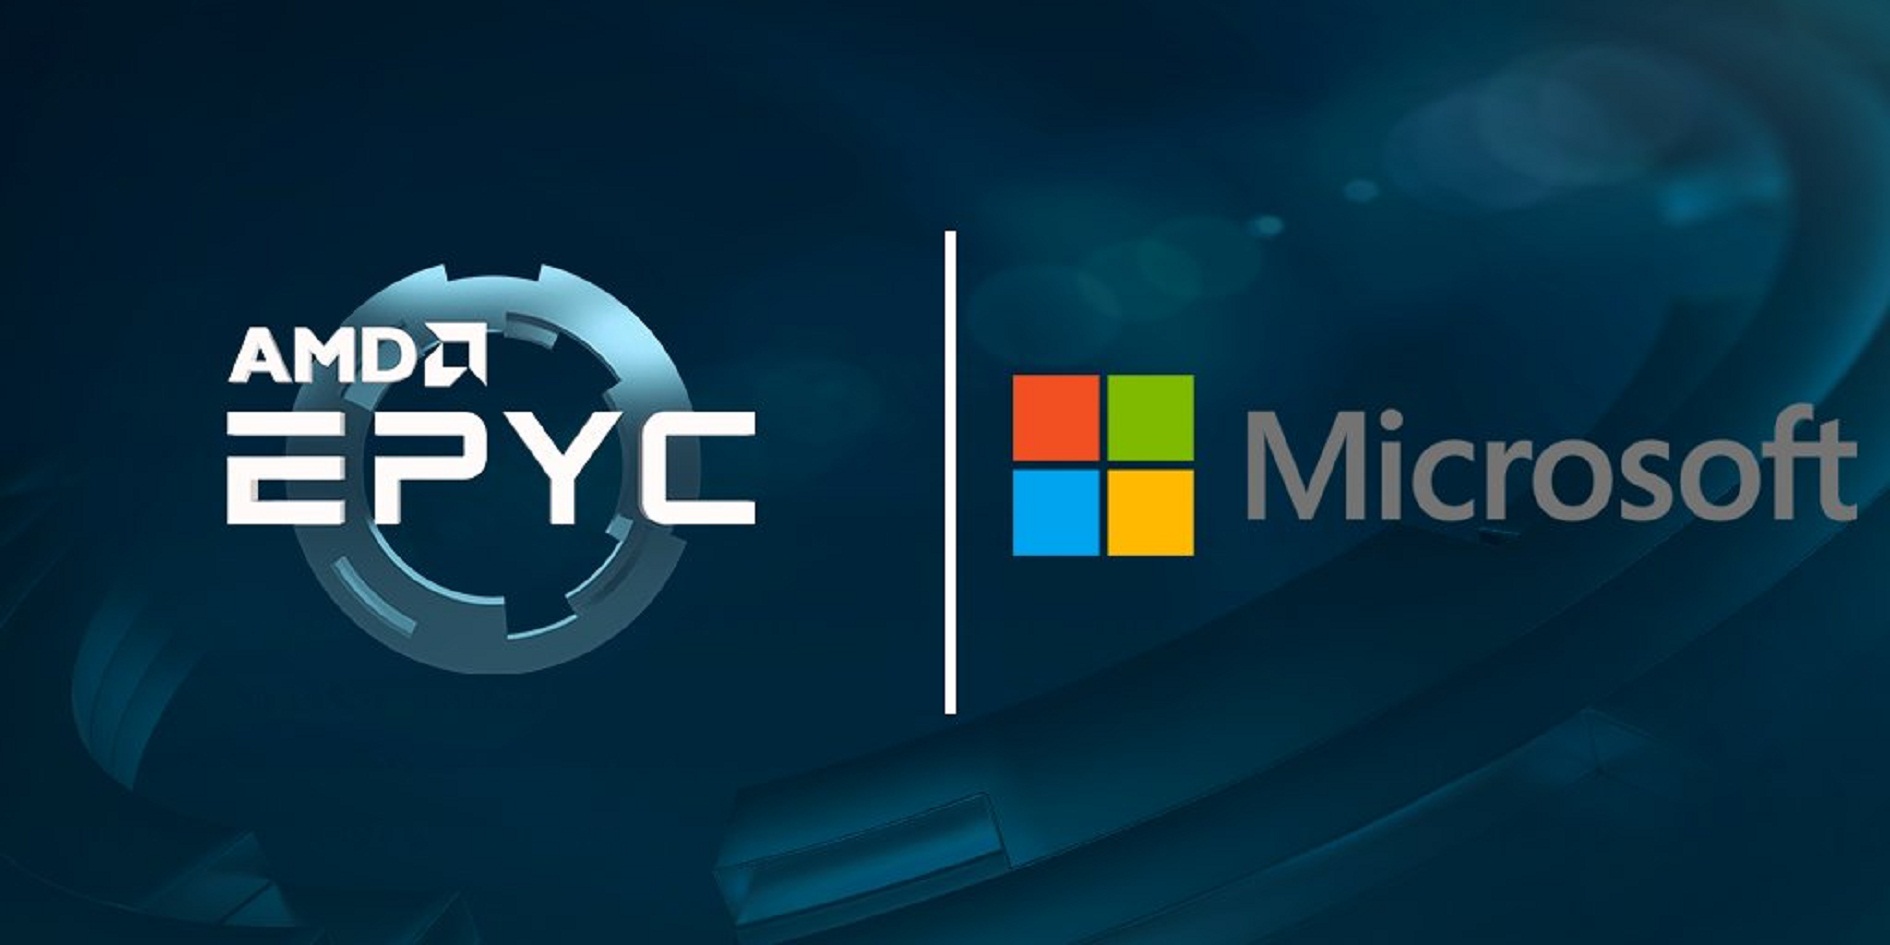 Microsoft Now Has Azure NVv4 Virtual Machines Have Support For AMD EPYC And Radeon Instinct GPUs